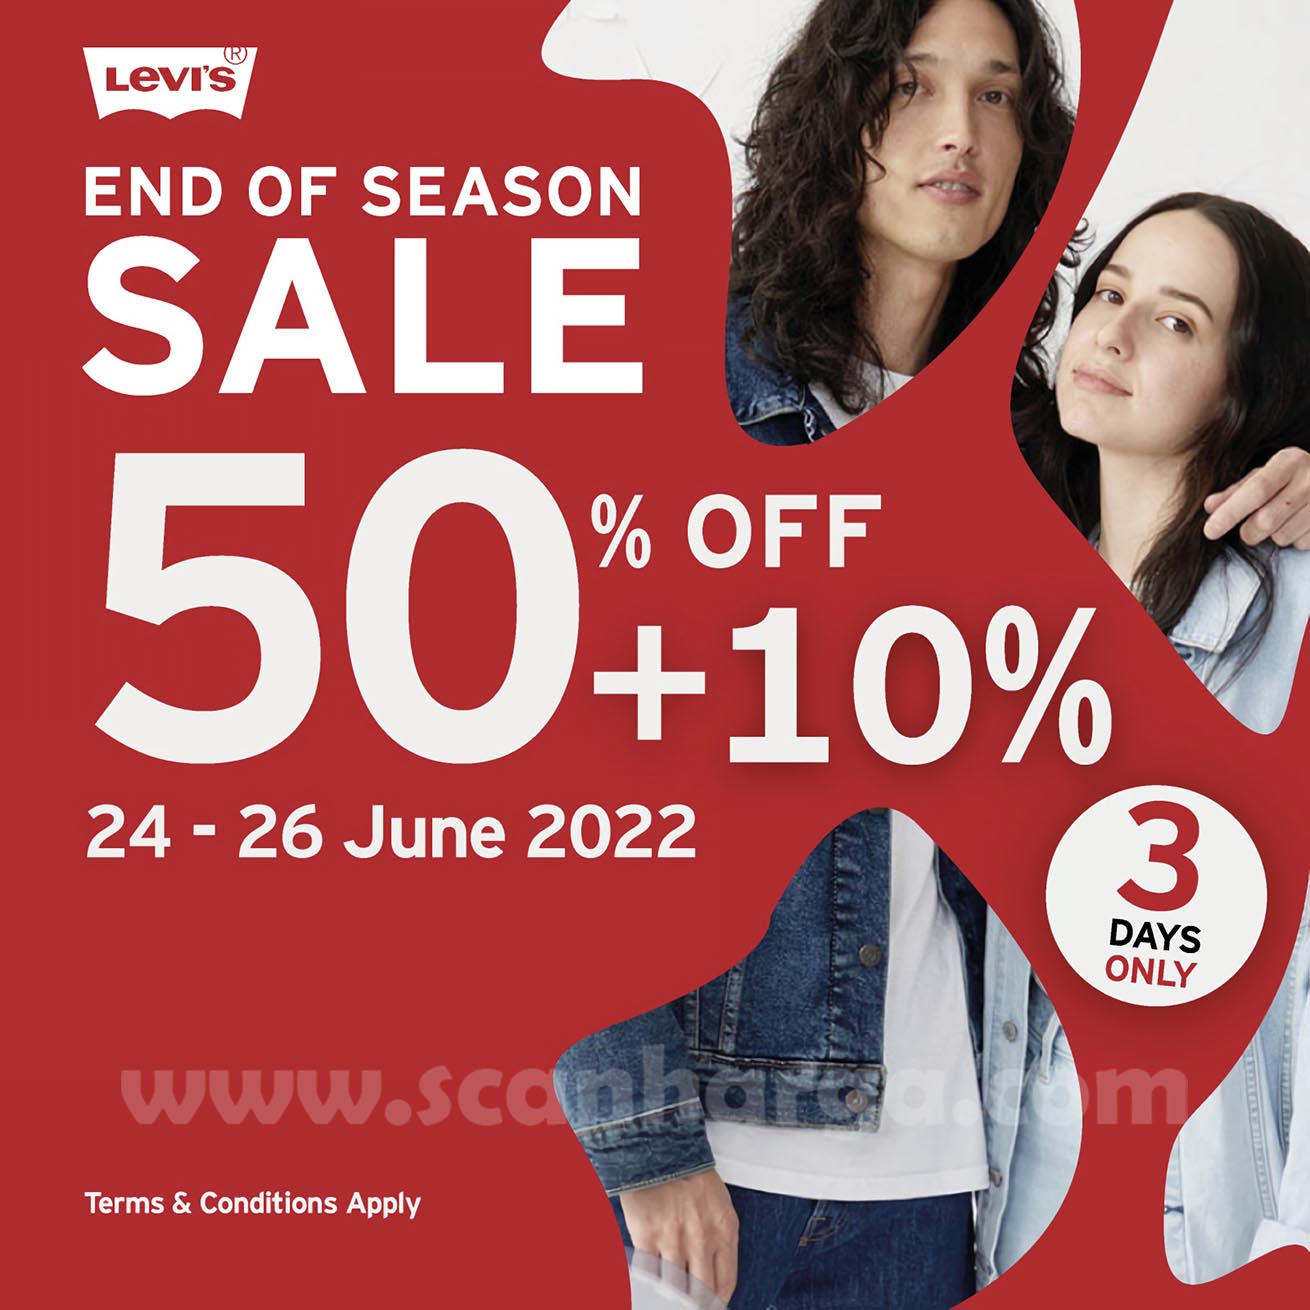 Promo Levi's End Of Season Sale Discount Up to 50% Off